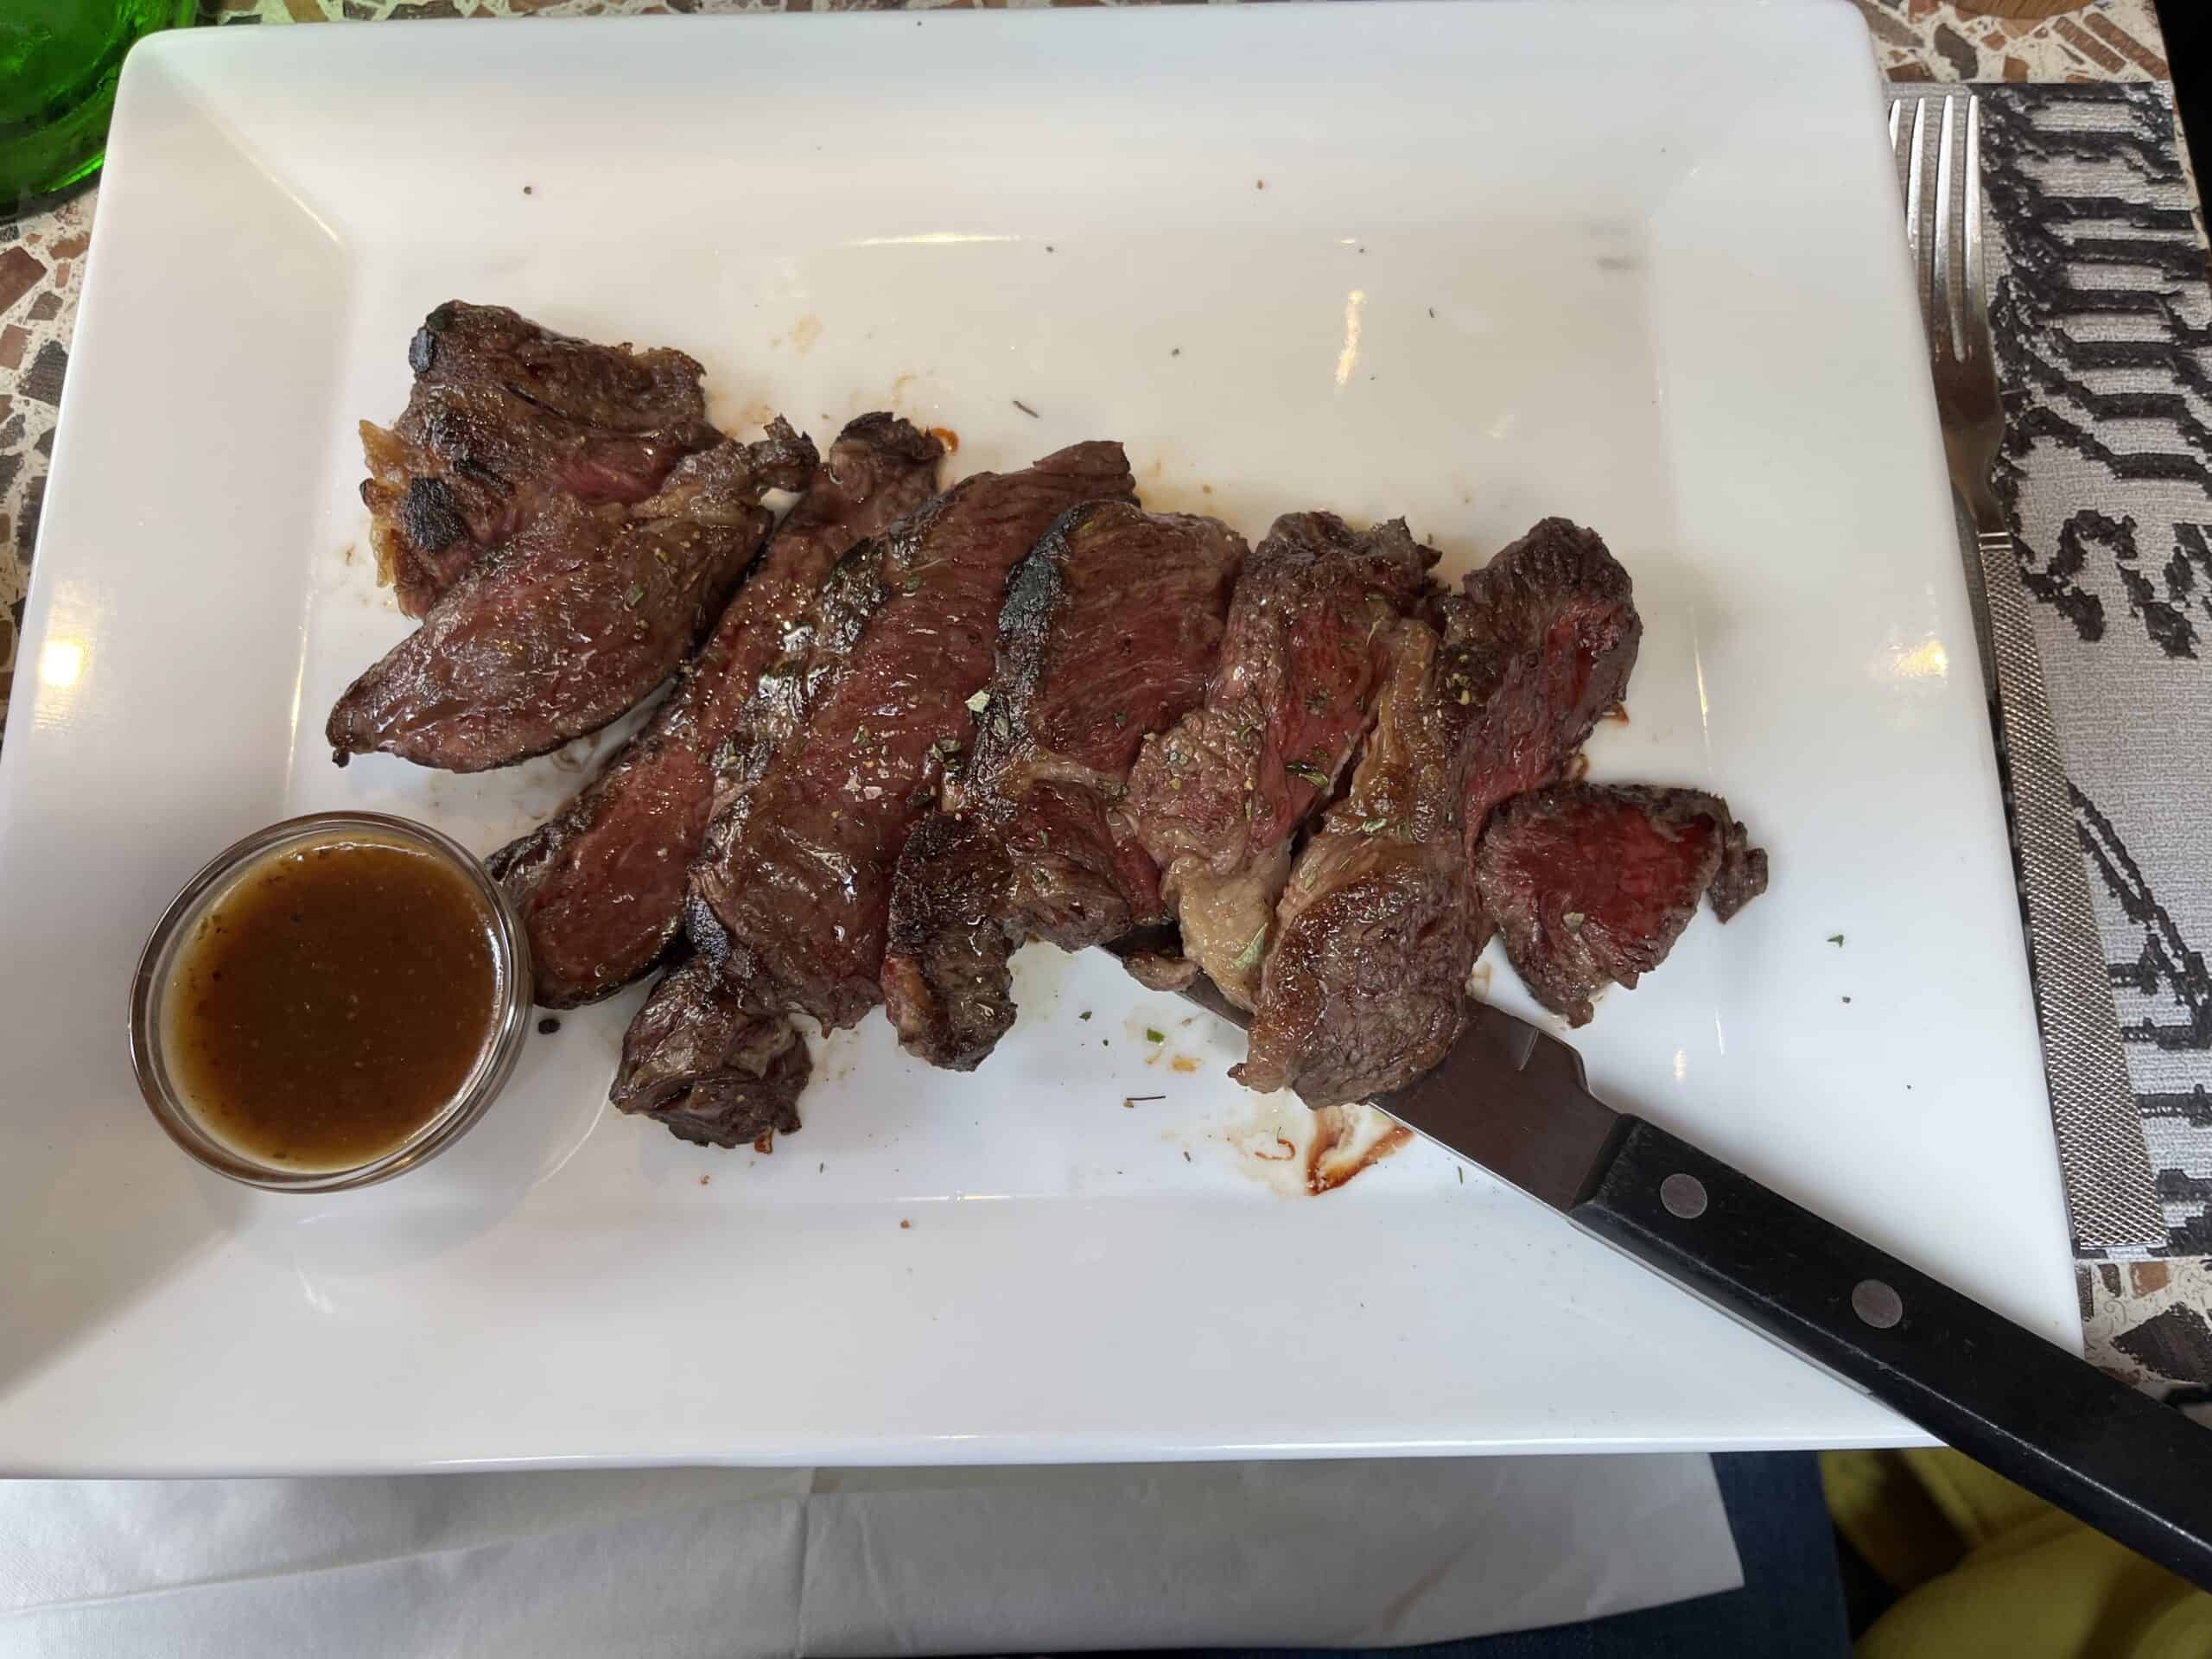 Best things to do in Angouleme France - Kylie Lang - Steak entree at Saint Andre Restaurant